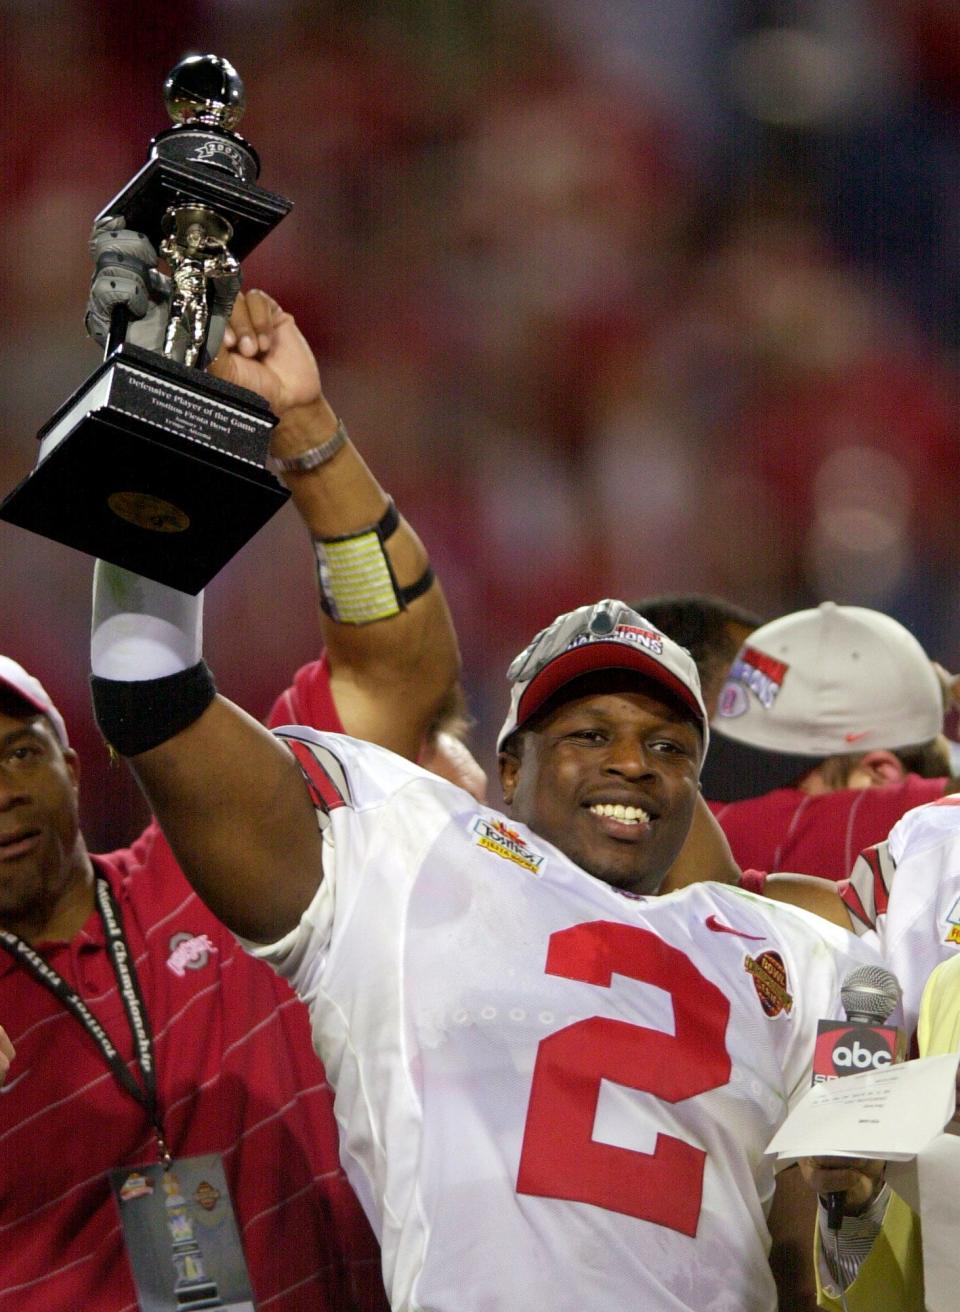 Ohio State's Michael Doss raises the defensive MVP trophy after the Buckeyes beat Miami 31-24 to win the Fiesta Bowl and national championship in Tempe, Ariz. Friday, Jan. 3, 2003.